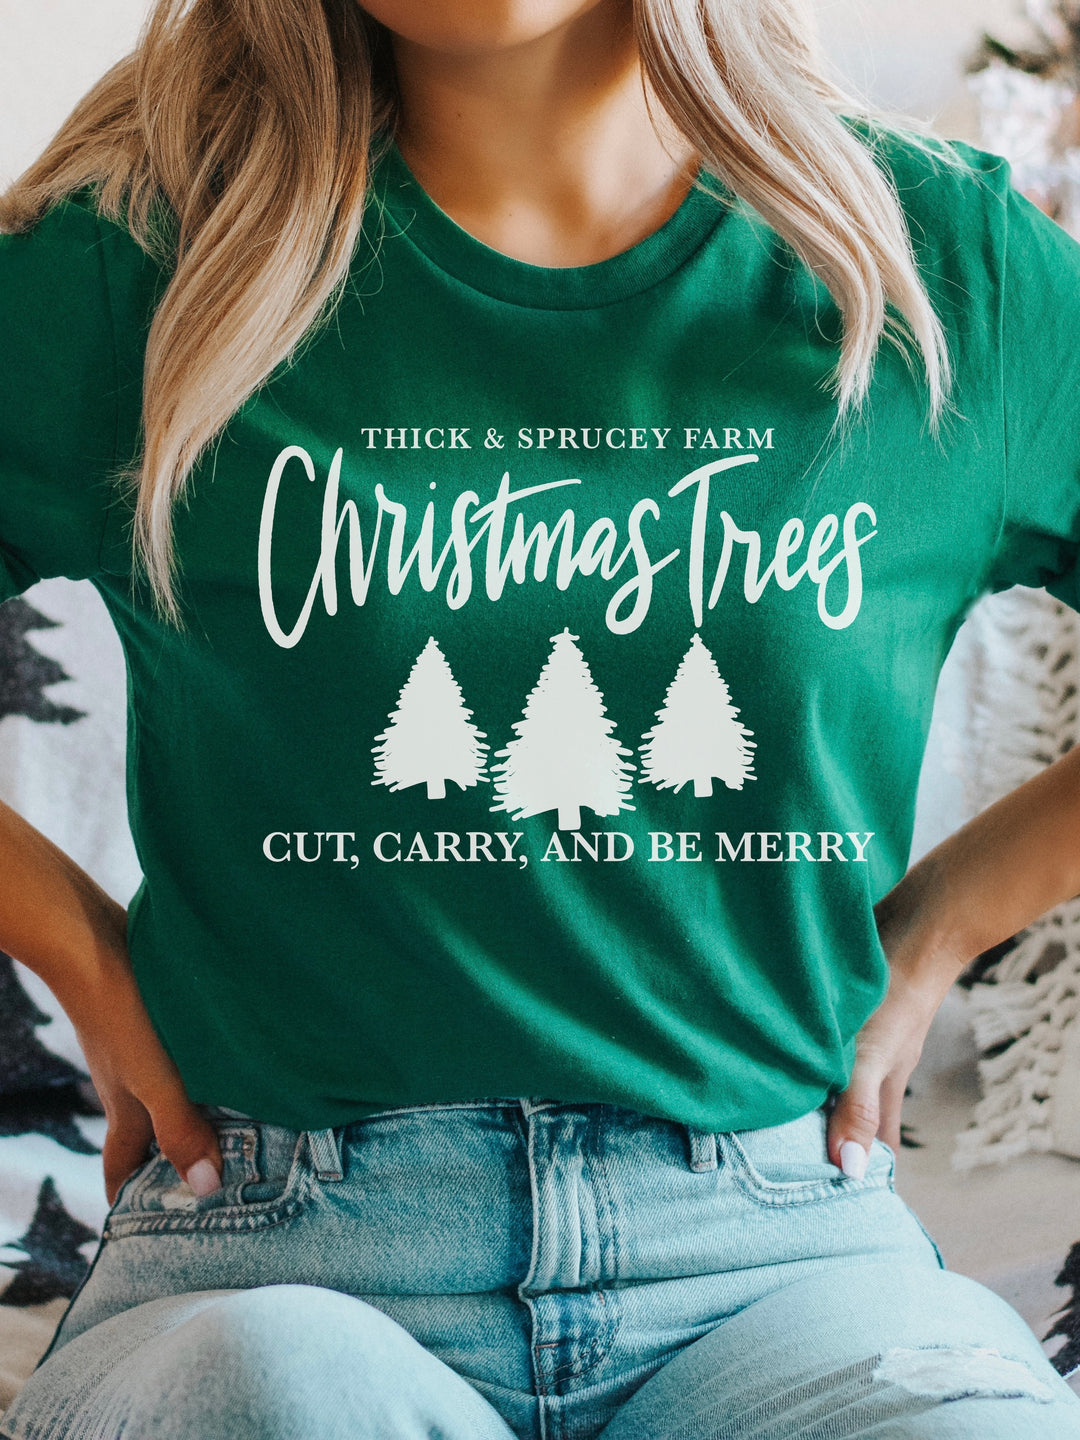 Thick and Sprucey Tree Farm Unisex Tee